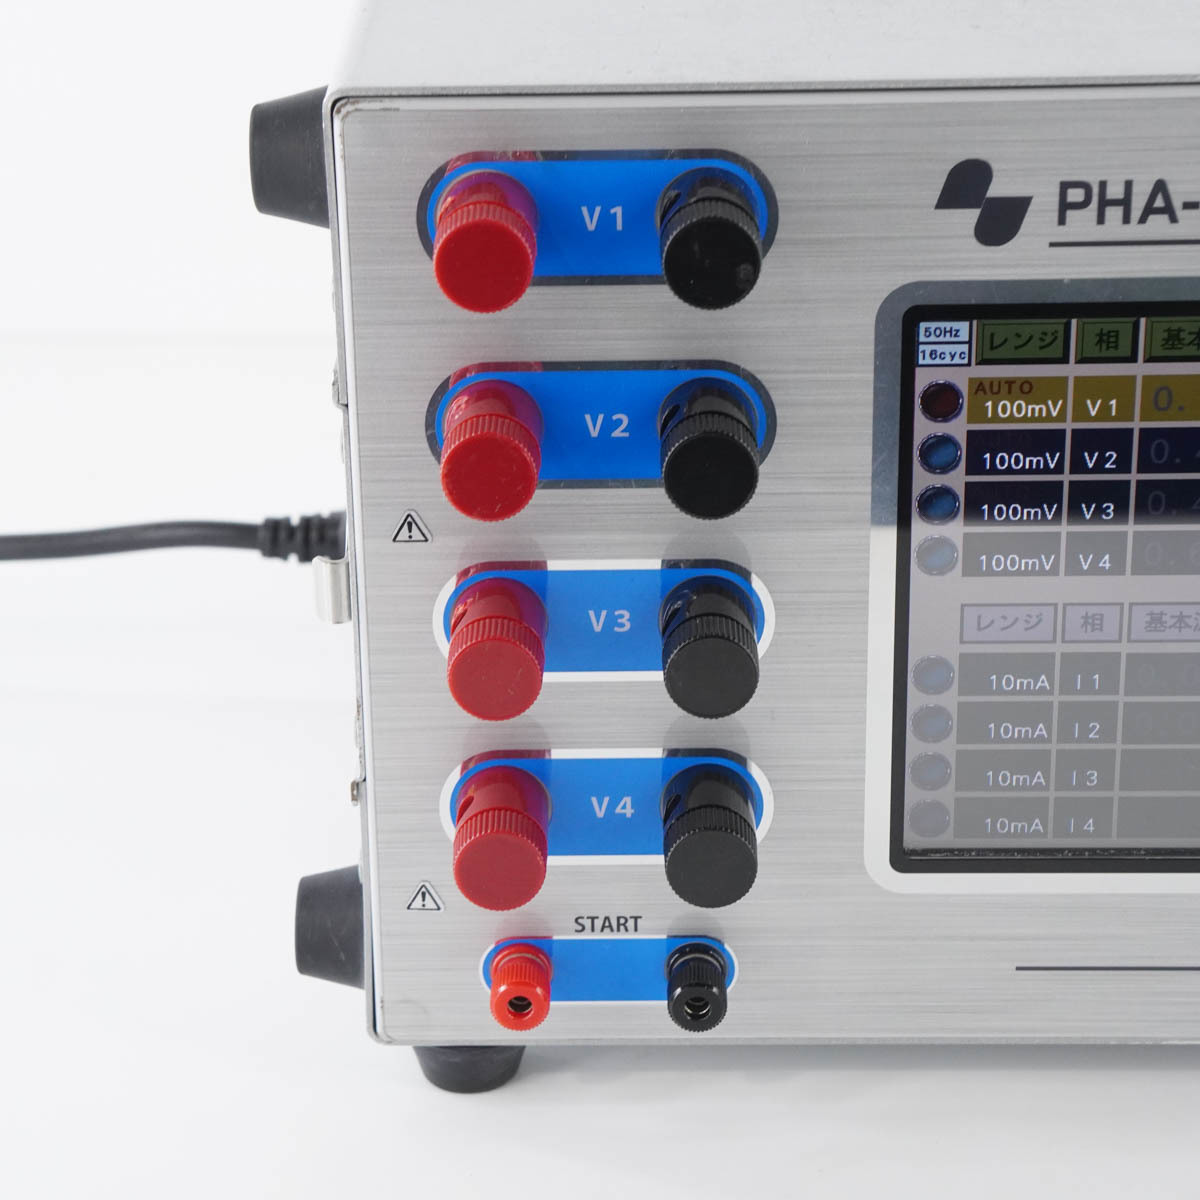 [JB] ジャンク PHA-200A-13 KINKEI SYSTEM CT-50A*4 CT-10A*4 近計システム MULTI FUNCTION PHASE METER デジタル電圧電流 ...[05675-0073]_画像4